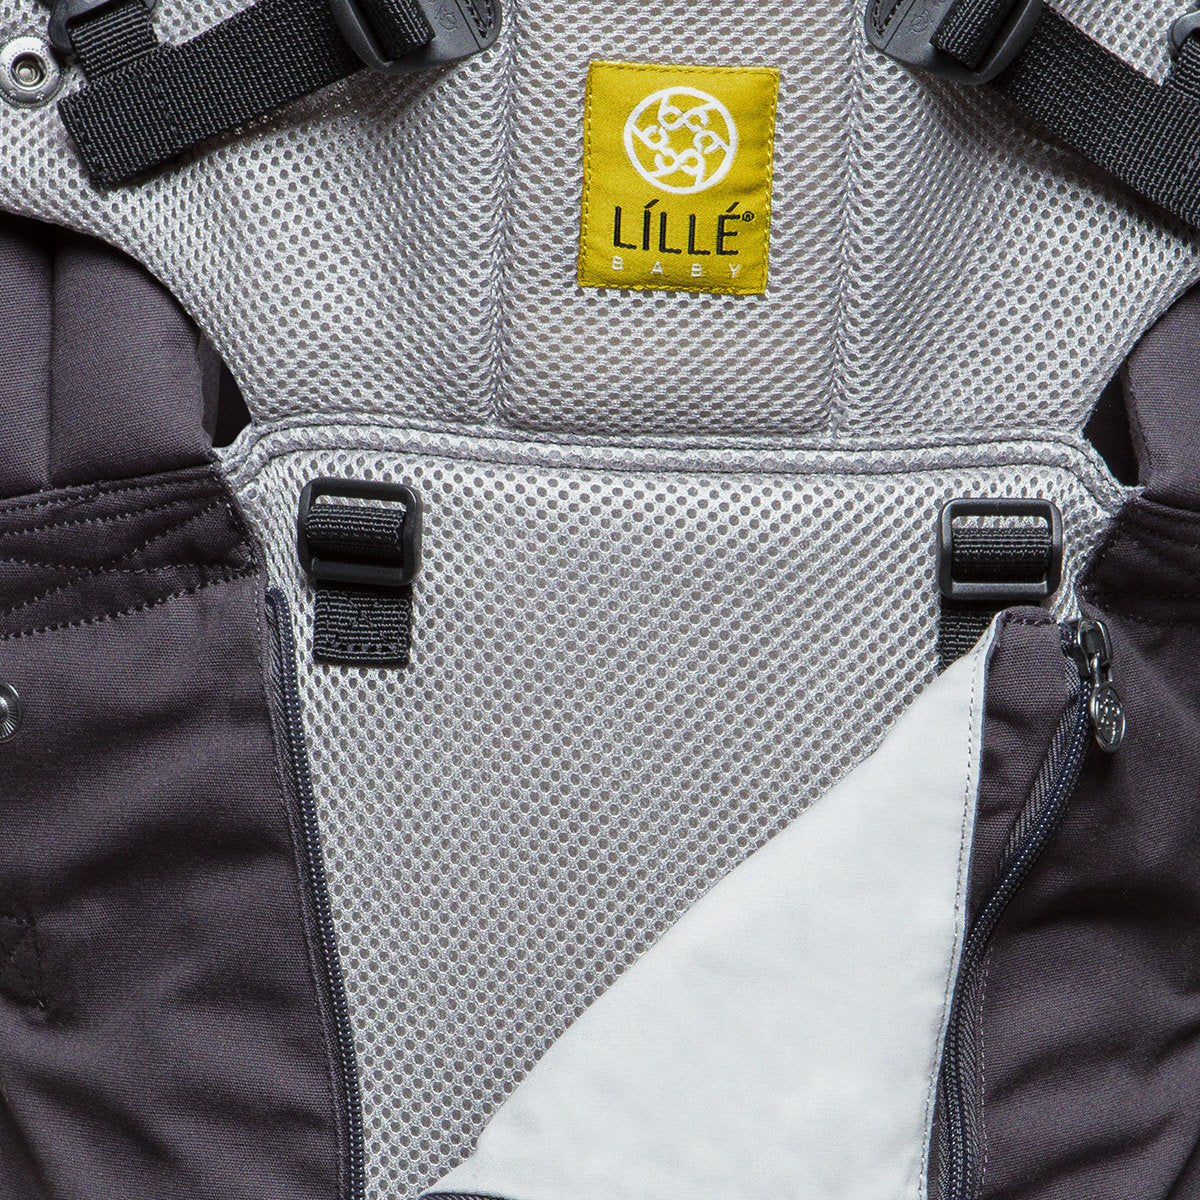 LÍLLÉbaby | COMPLETE All Seasons Baby Carrier - Charcoal/Silver - Belly Beyond 